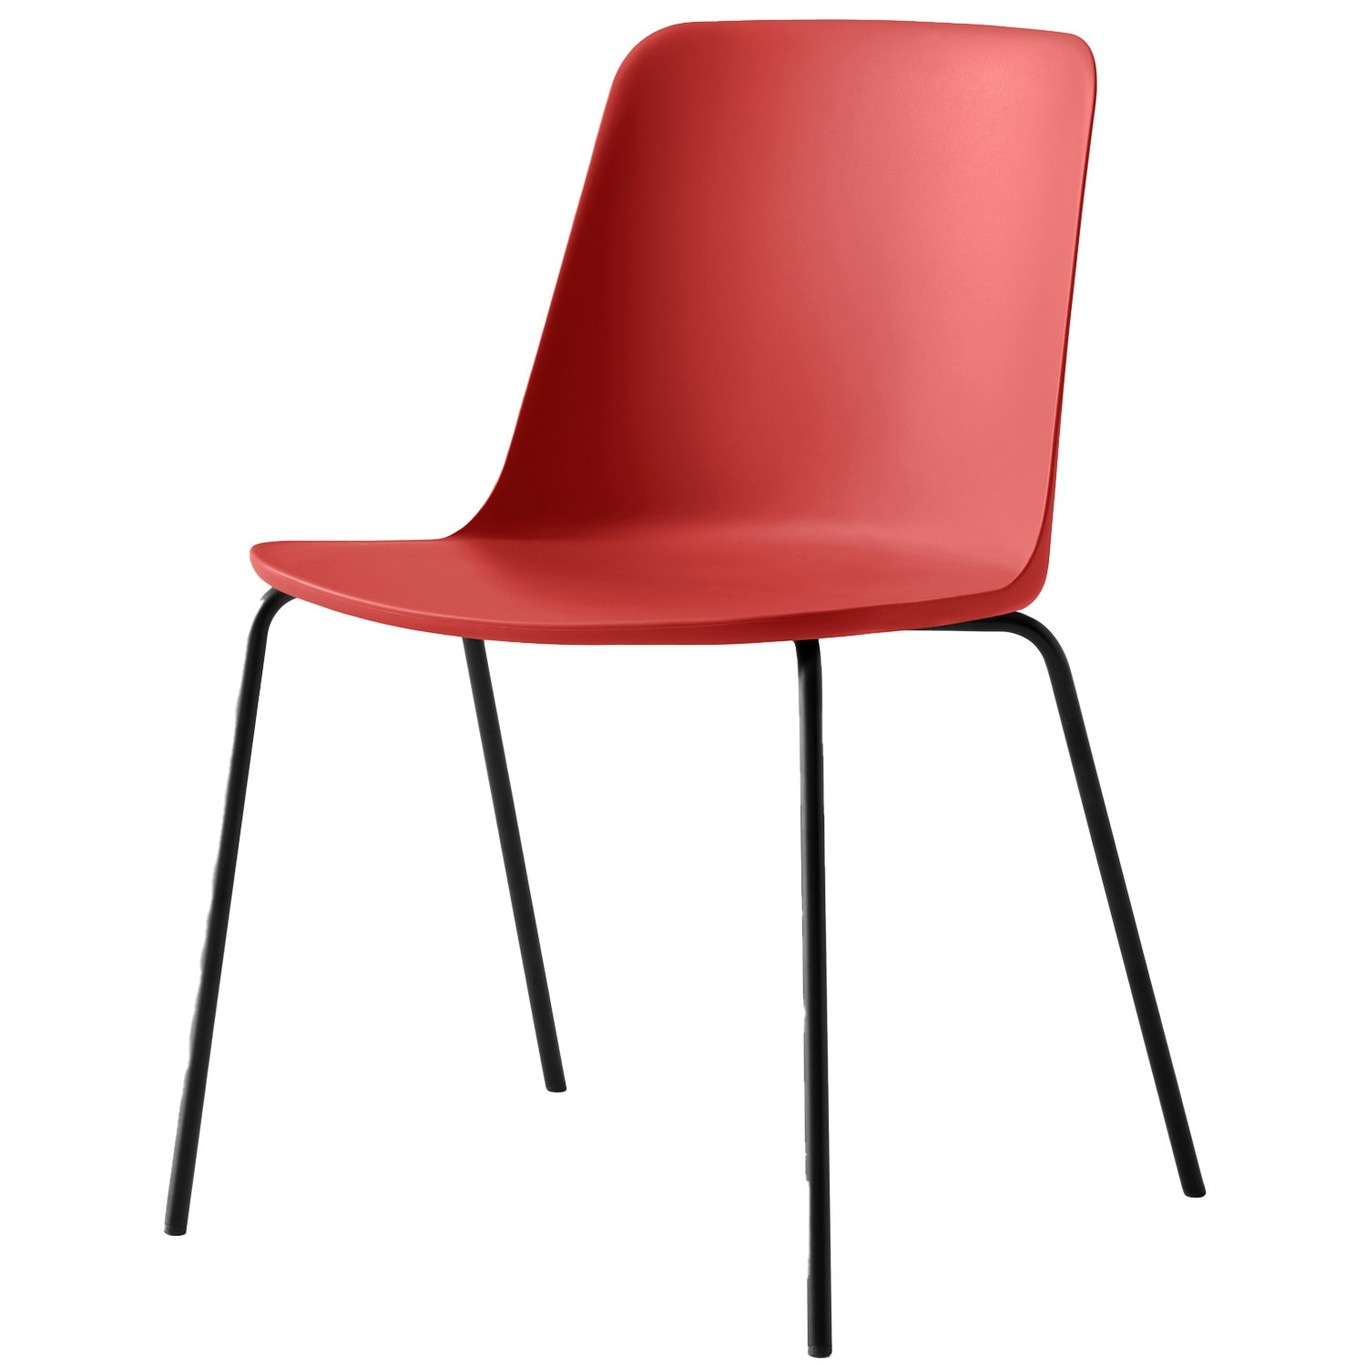 Rely Chair HW65, Vermilion Red